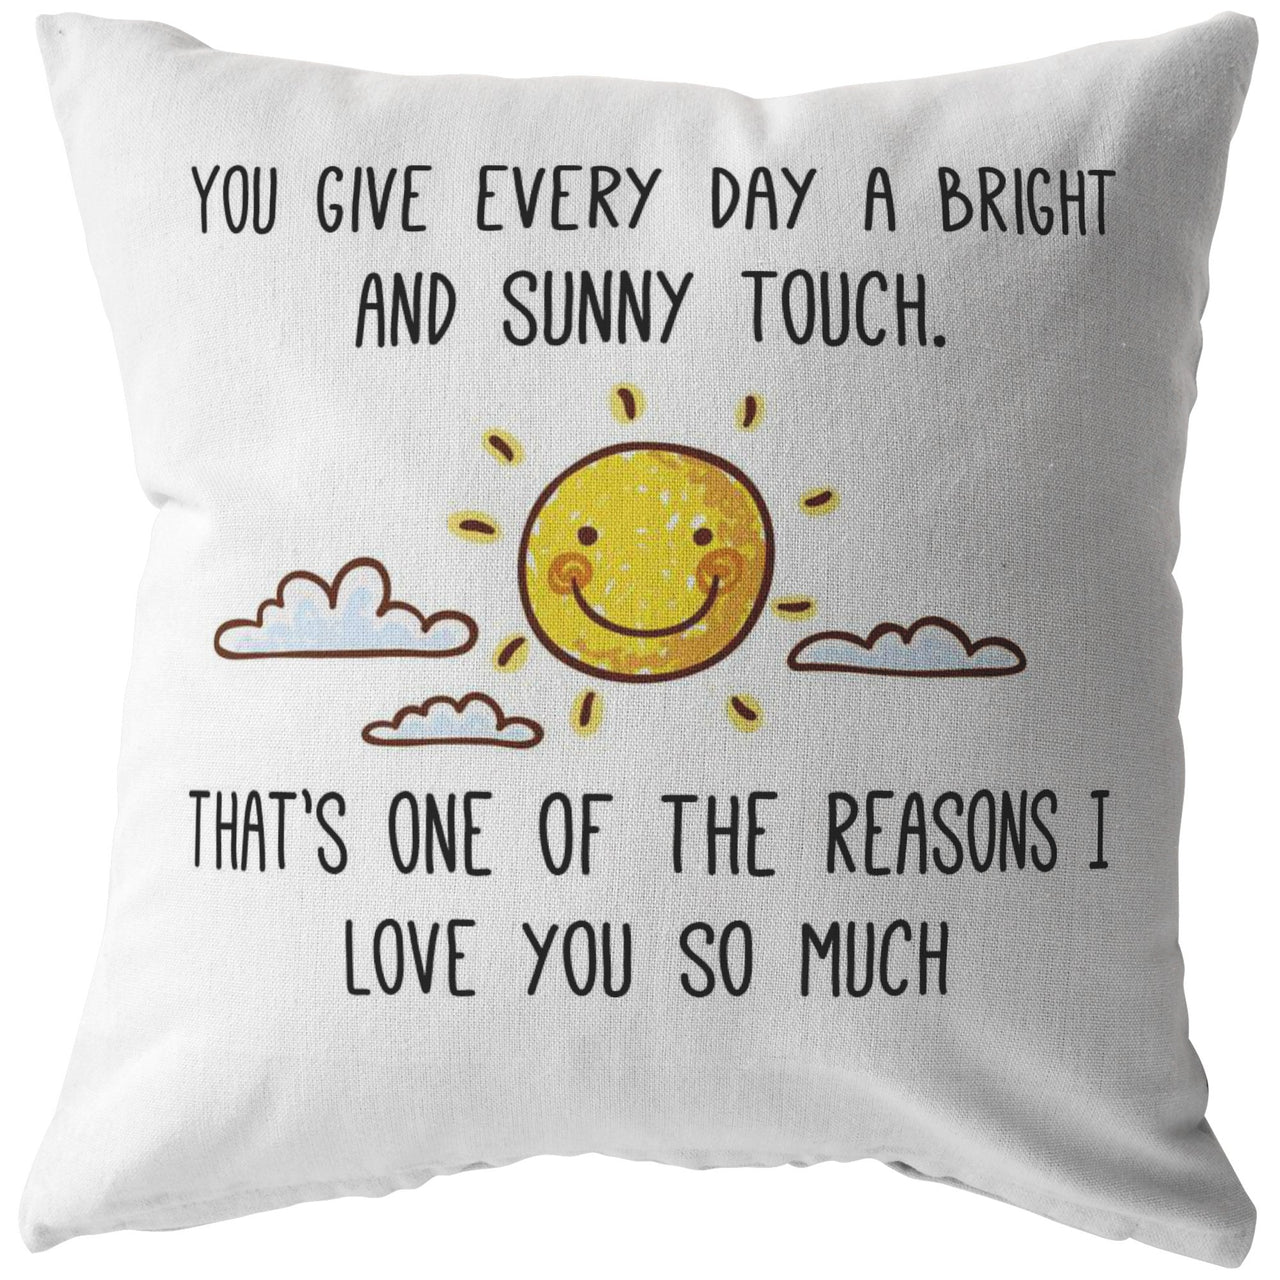 "You Give Every Day A Bright and Sunny Touch.." Pillow